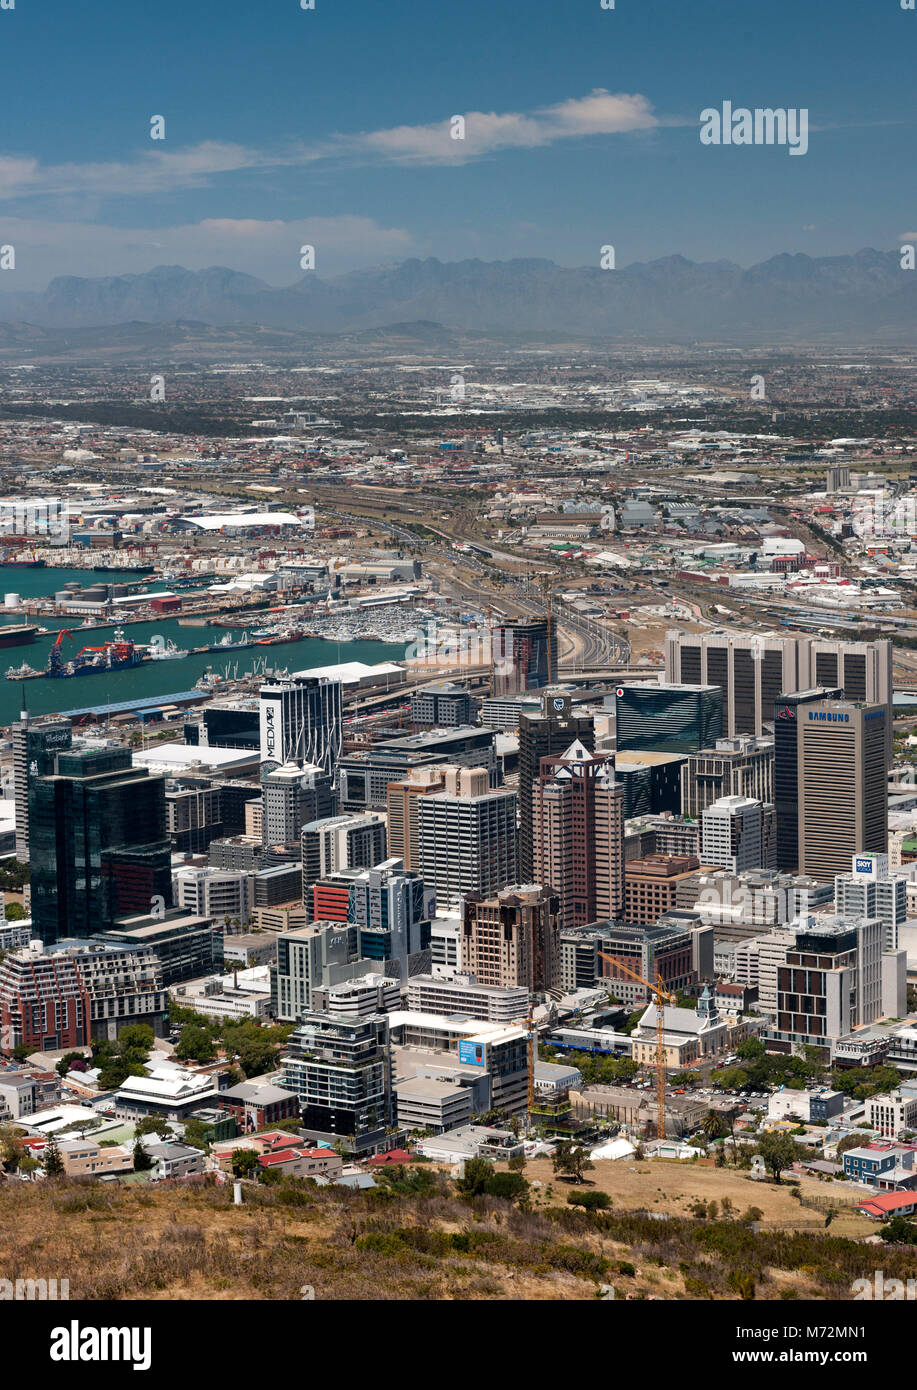 The Cape Town CBD in South Africa. Stock Photo